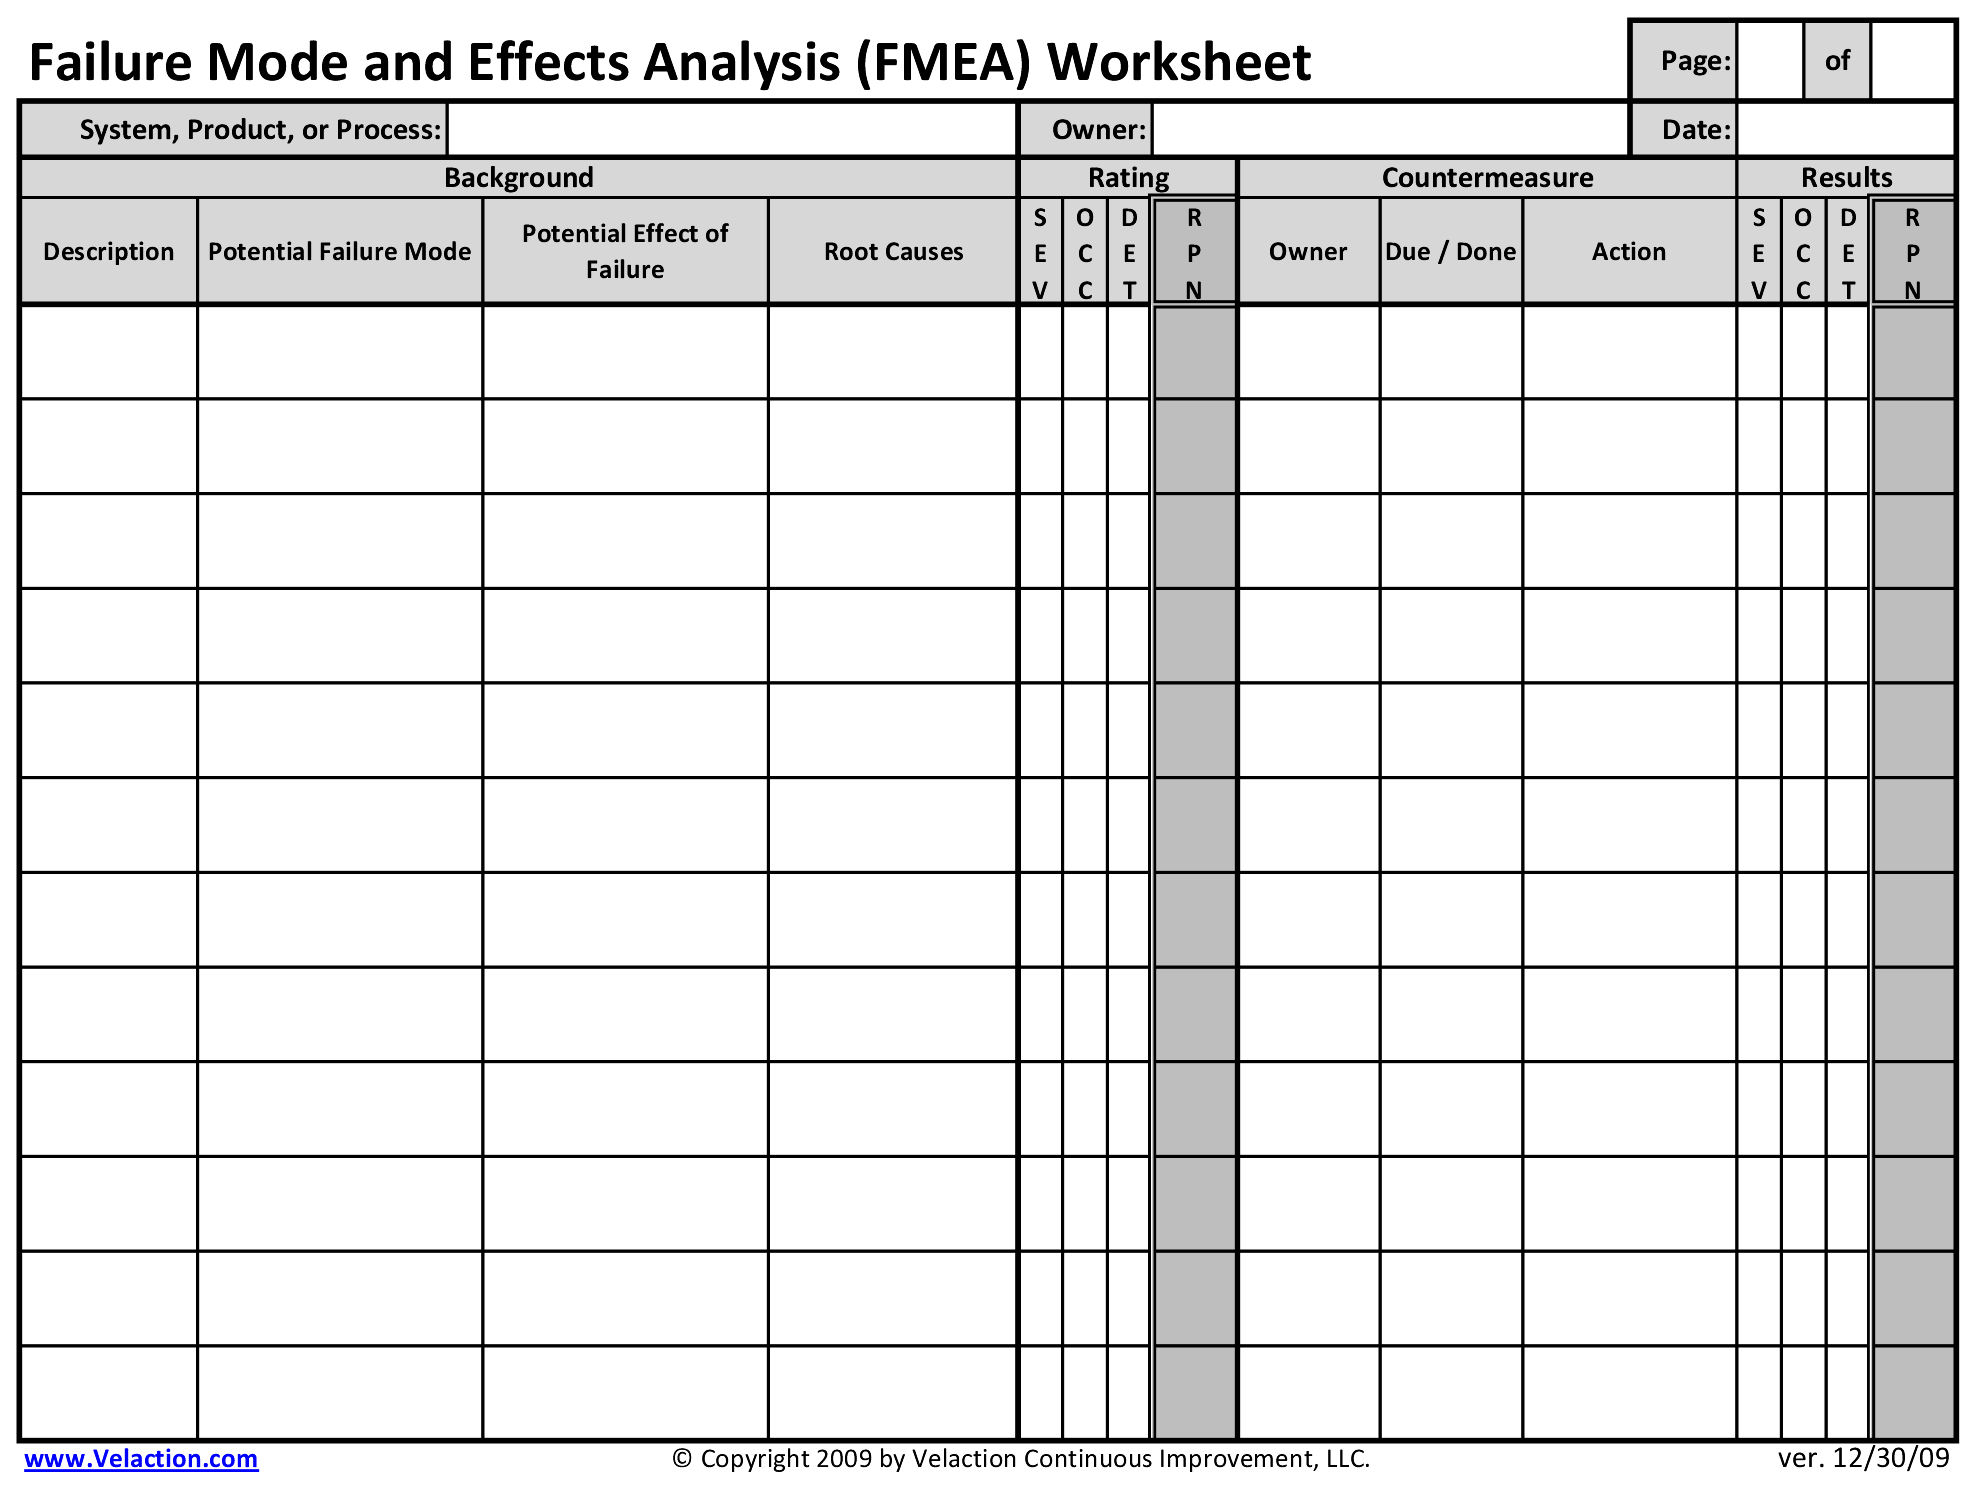 FMEA Worksheet Failure Mode And Effects Analysis Worksheet 